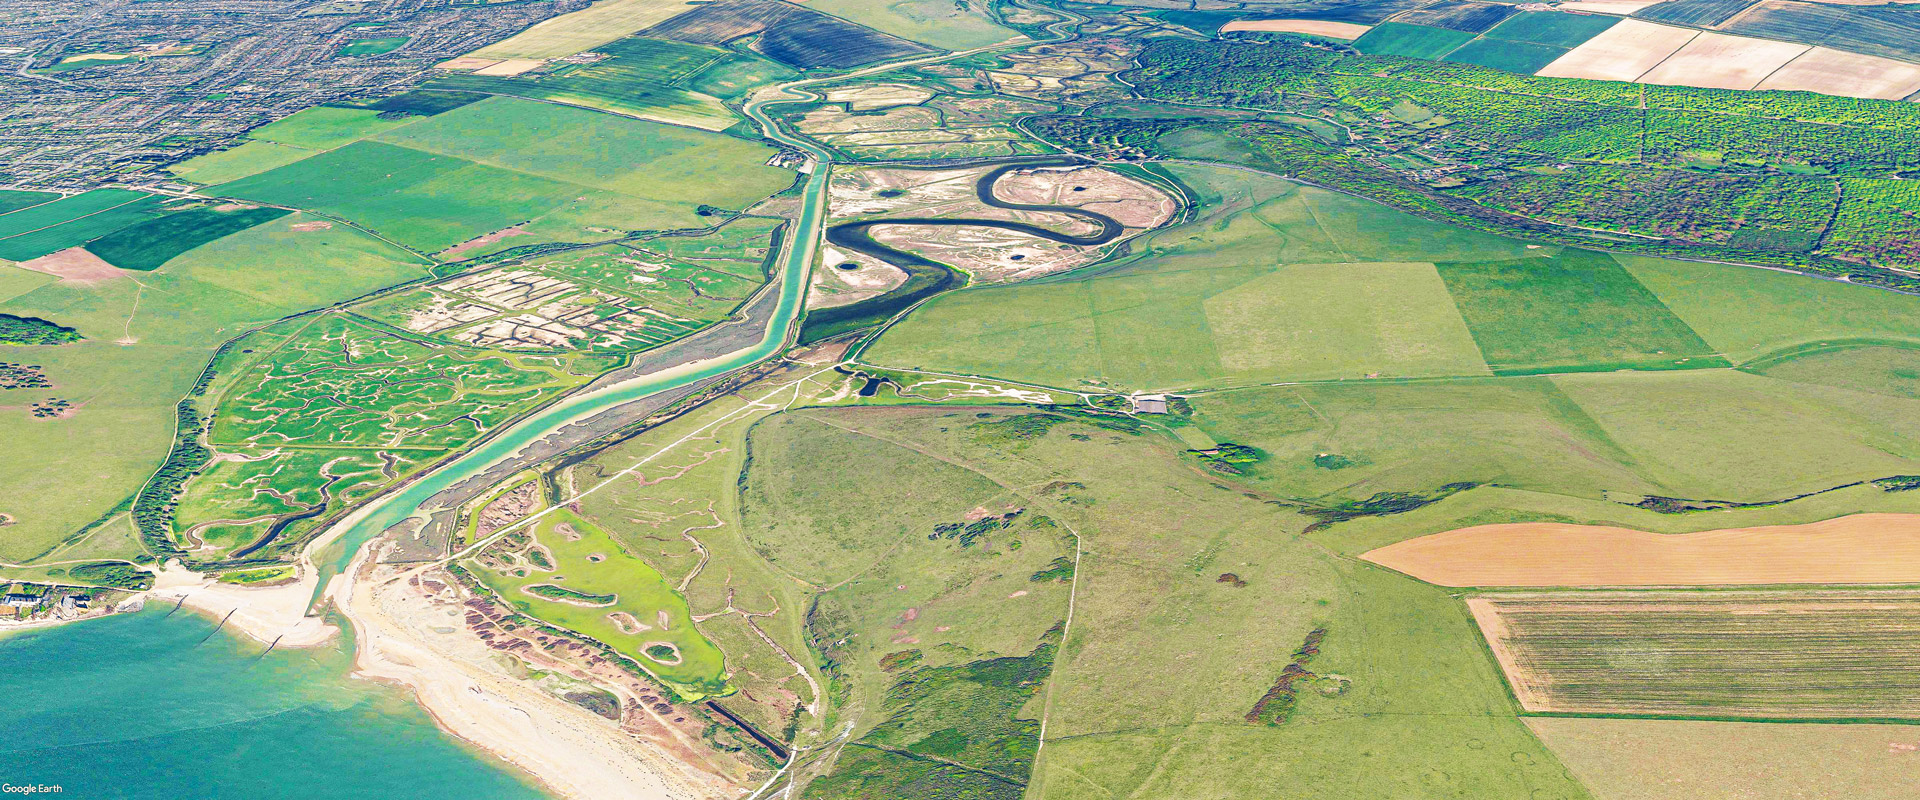 Seven Sisters Country Park First Phase Vision